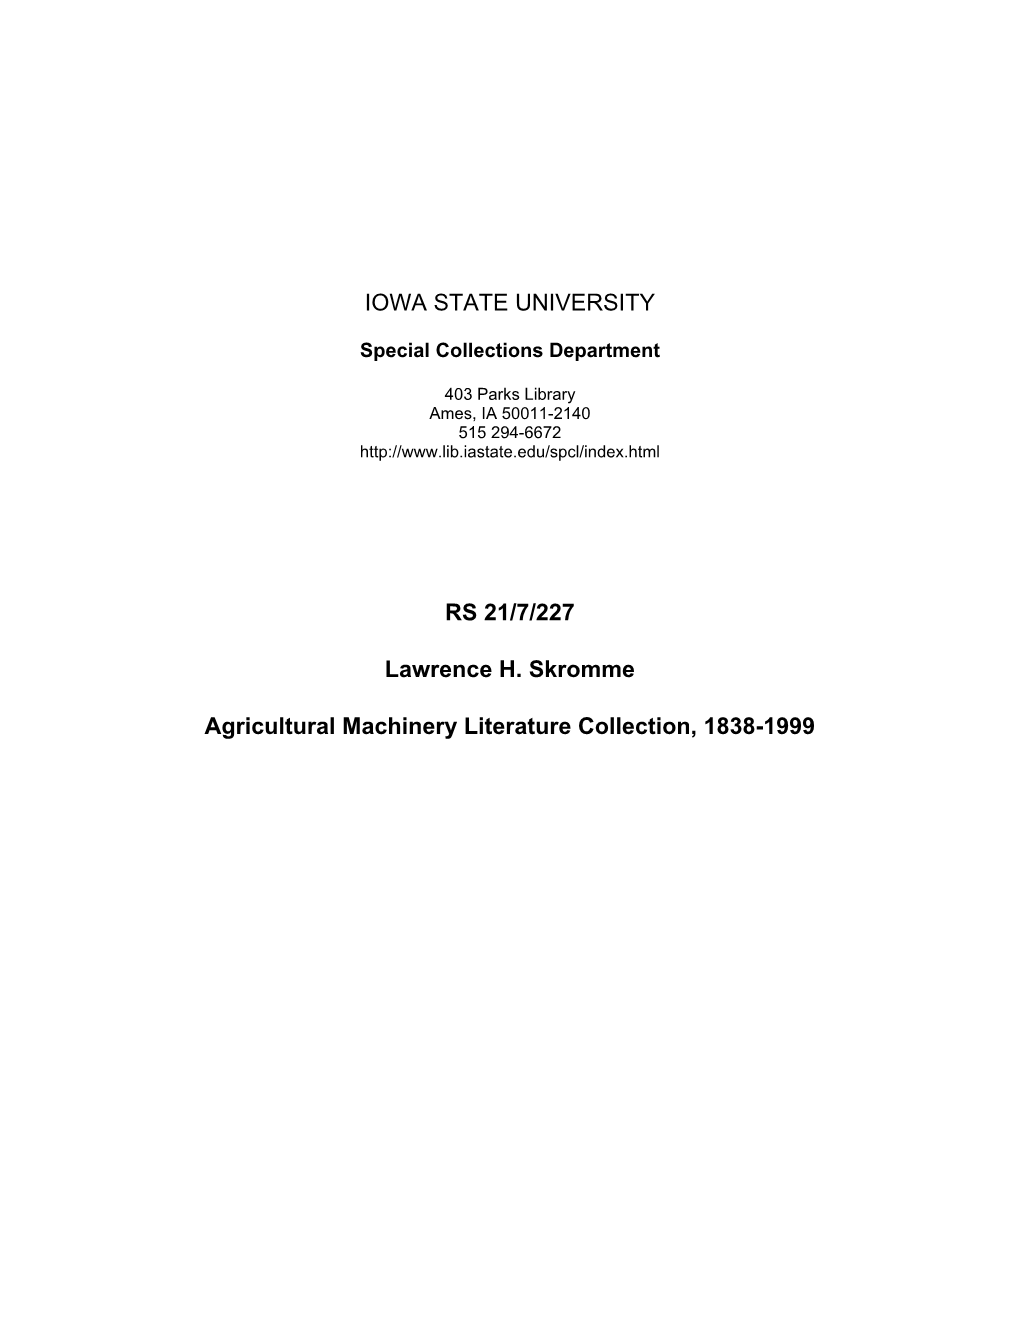 Lawrence H. Skromme Agricultural Machinery Literature Collection RS